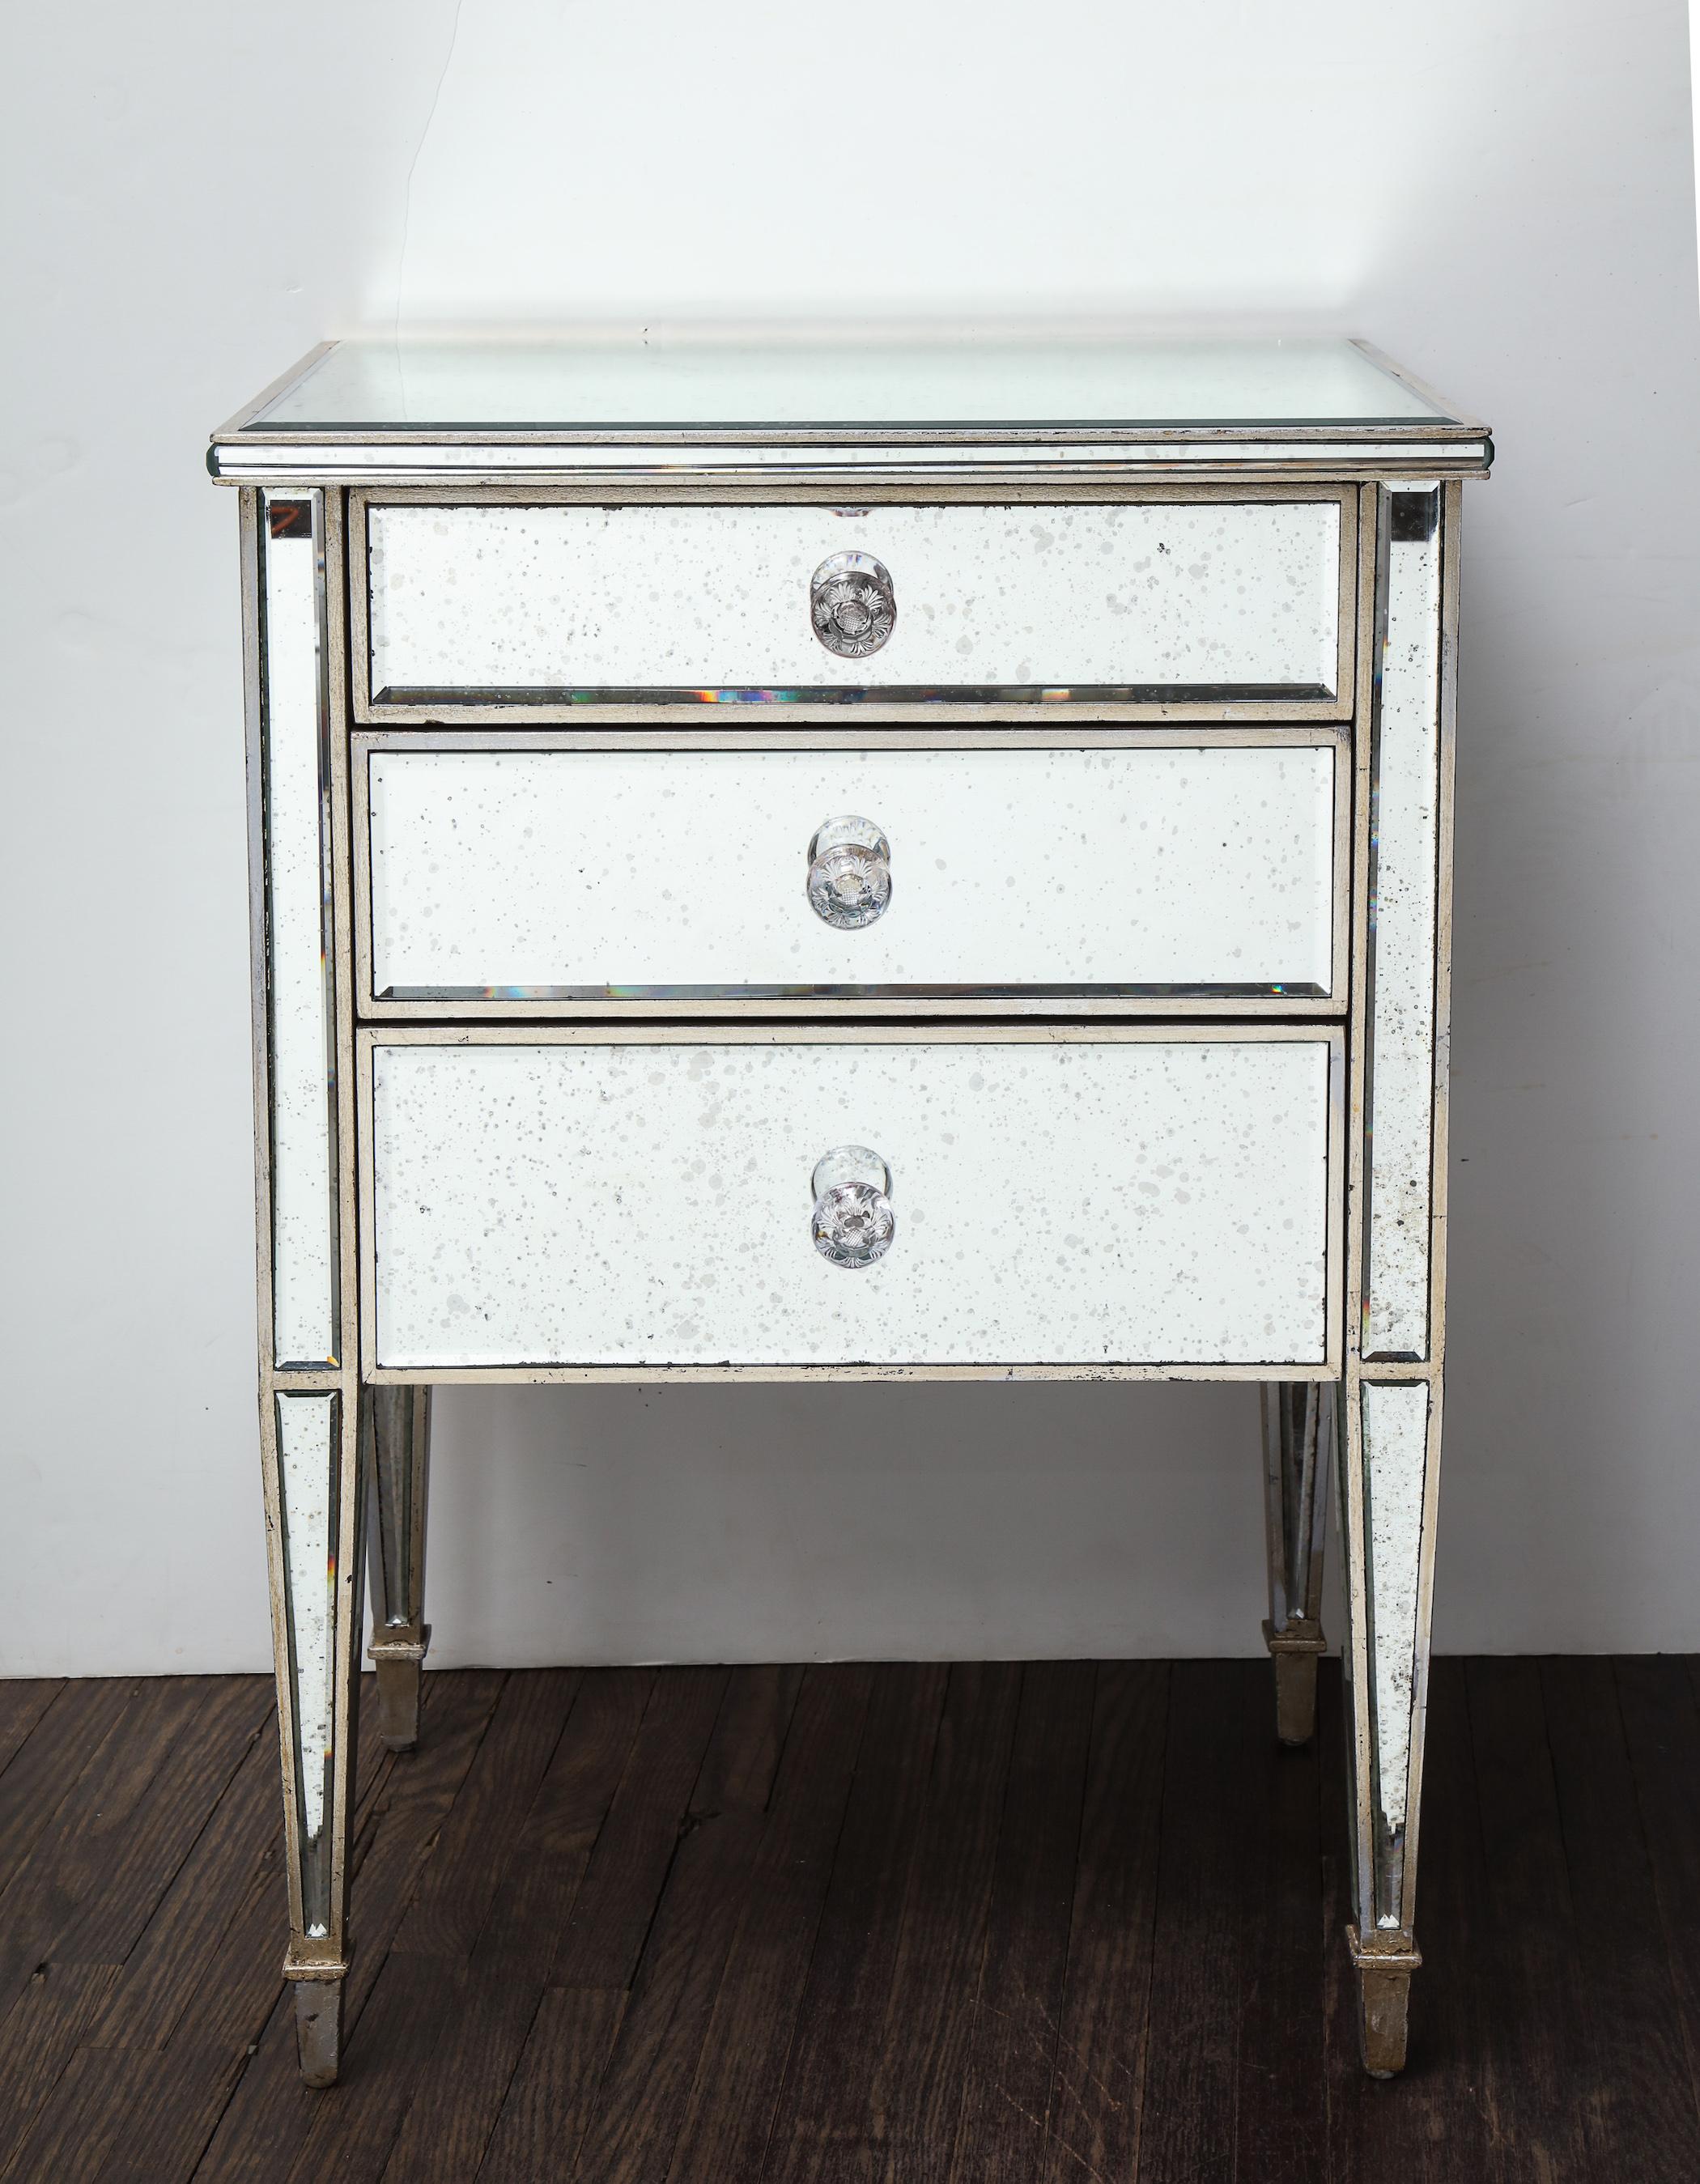 Pair of antique mirrored nightstands with silver gilt trim. Customization available in different sizes, finishes and hardware.